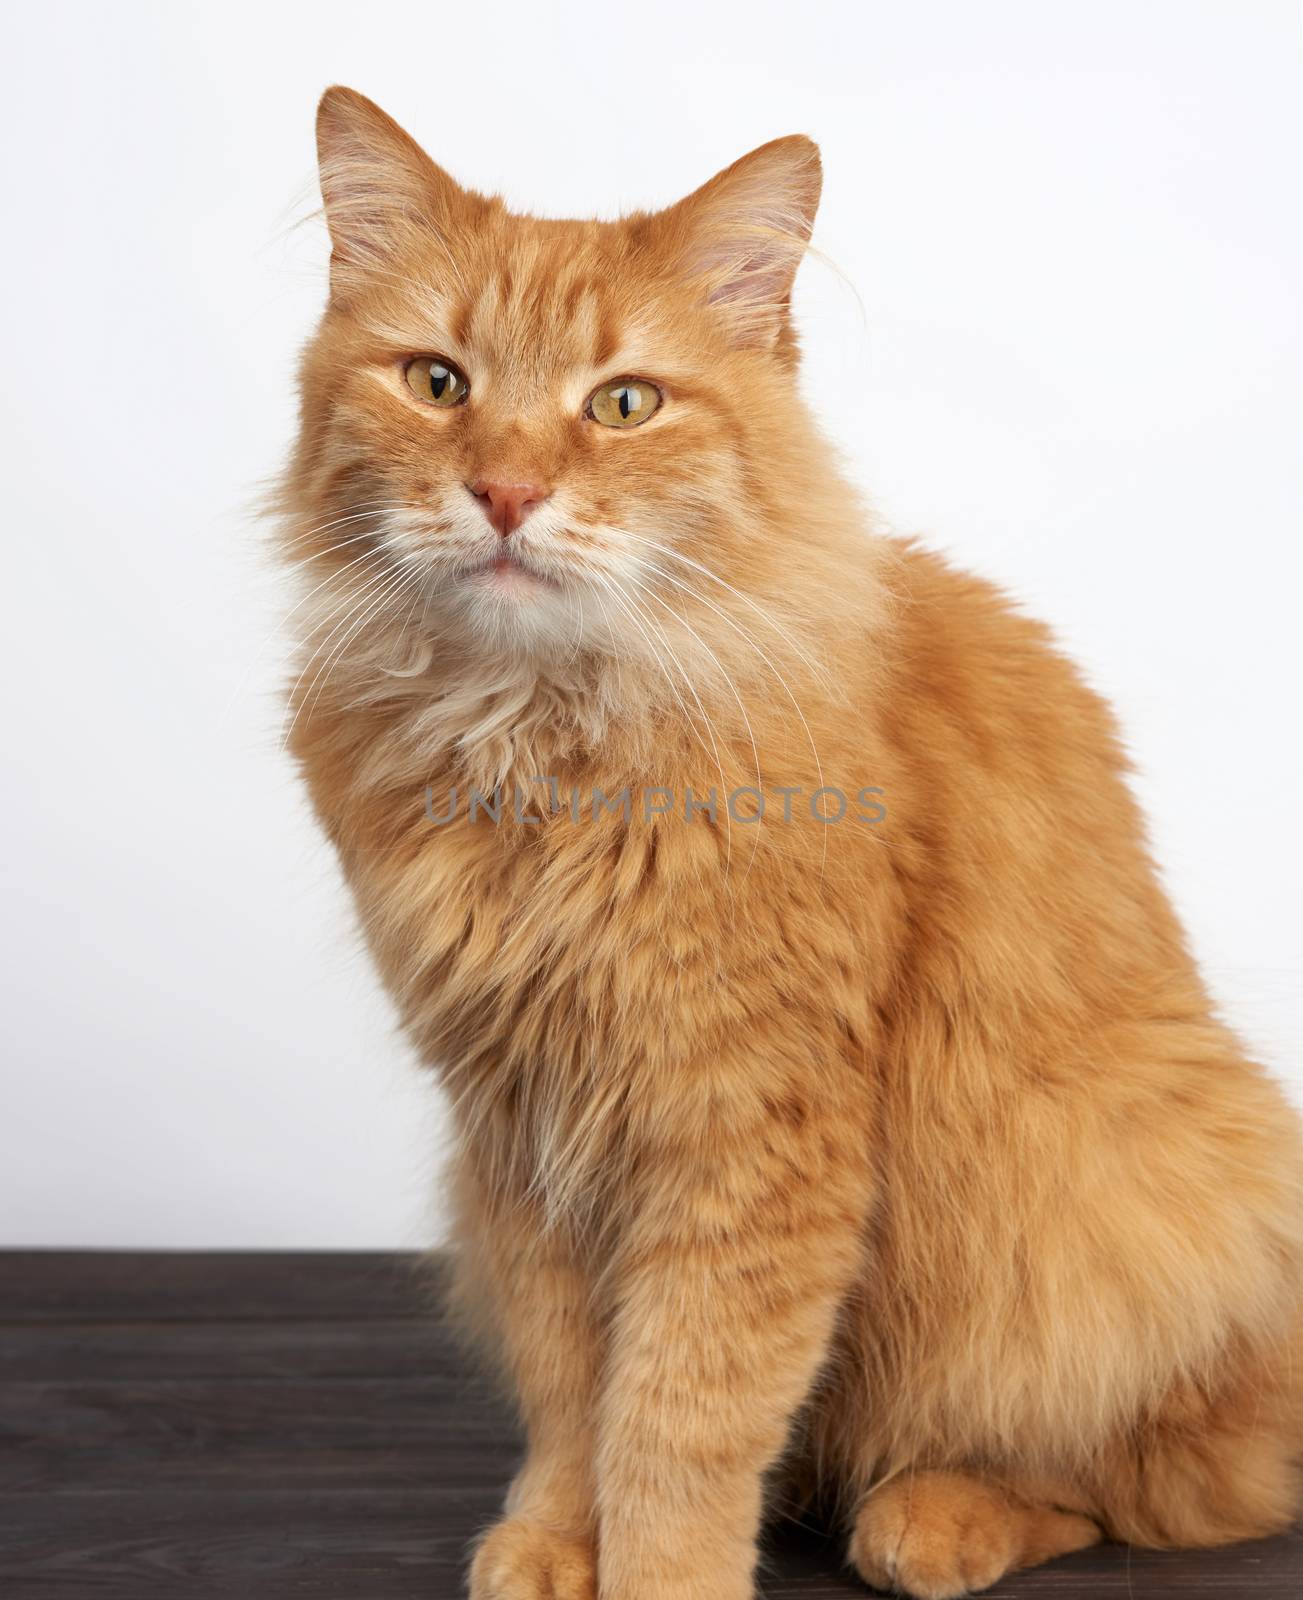 portrait of an adult ginger cat on a white background by ndanko